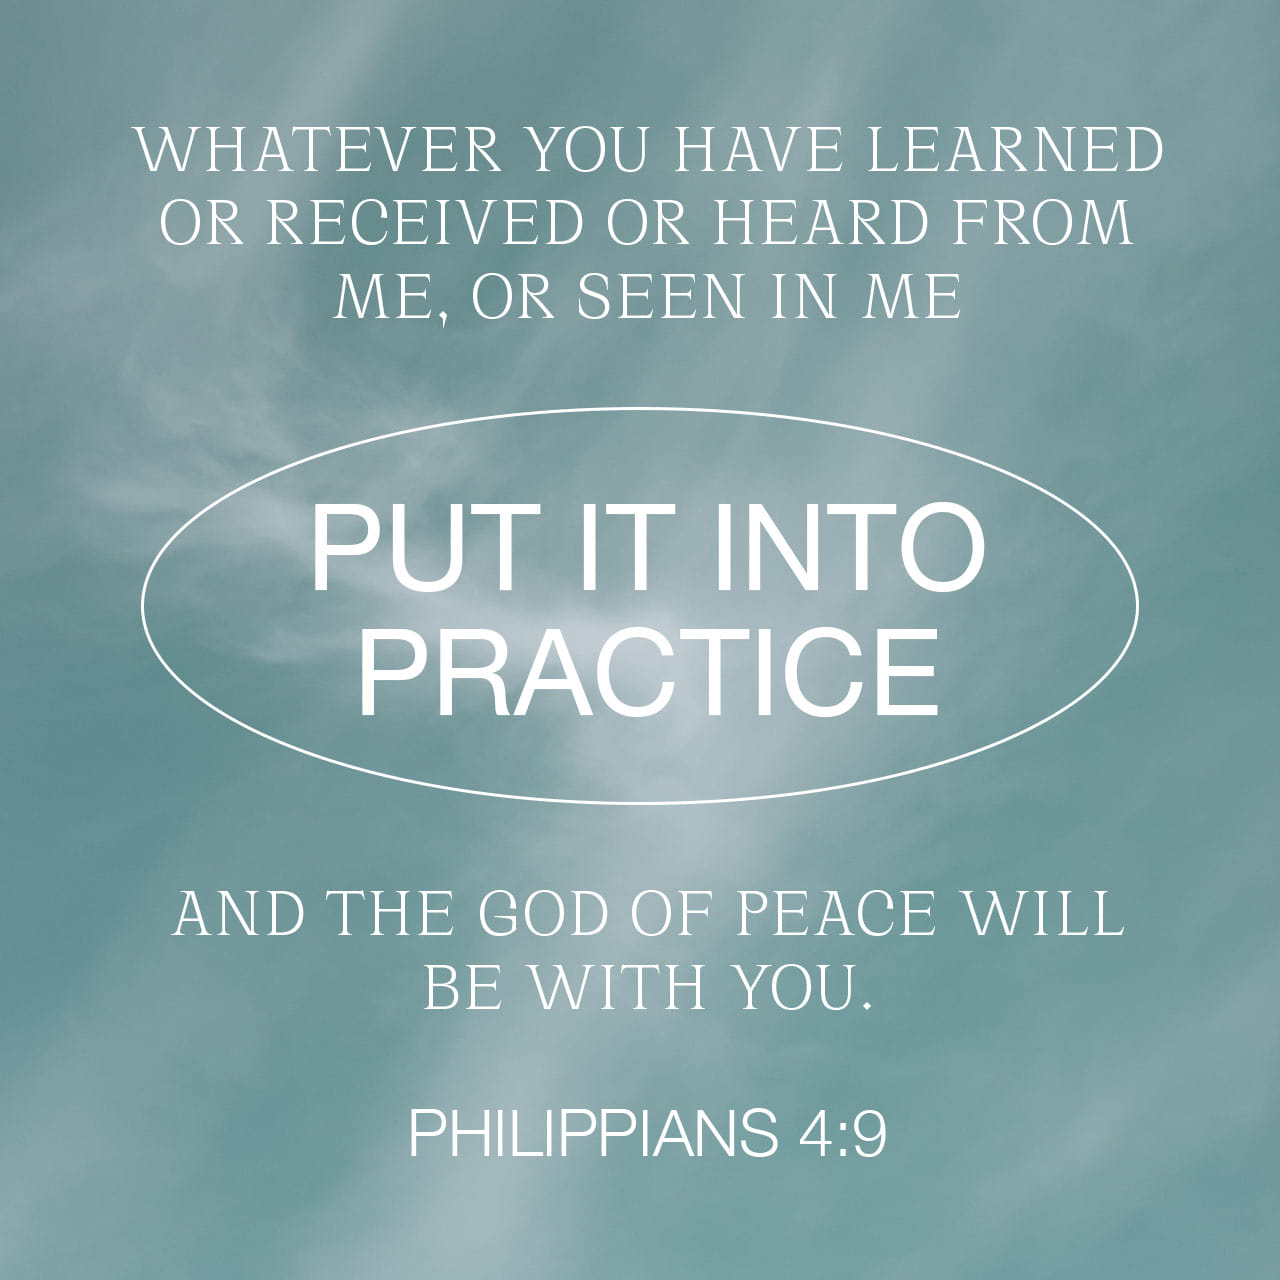 Philippians 4:9 Those things, which ye have both learned, and received, and heard, and seen in me, do: and the God of peace shall be with you. | King James Version (KJV) | Download The Bible App Now